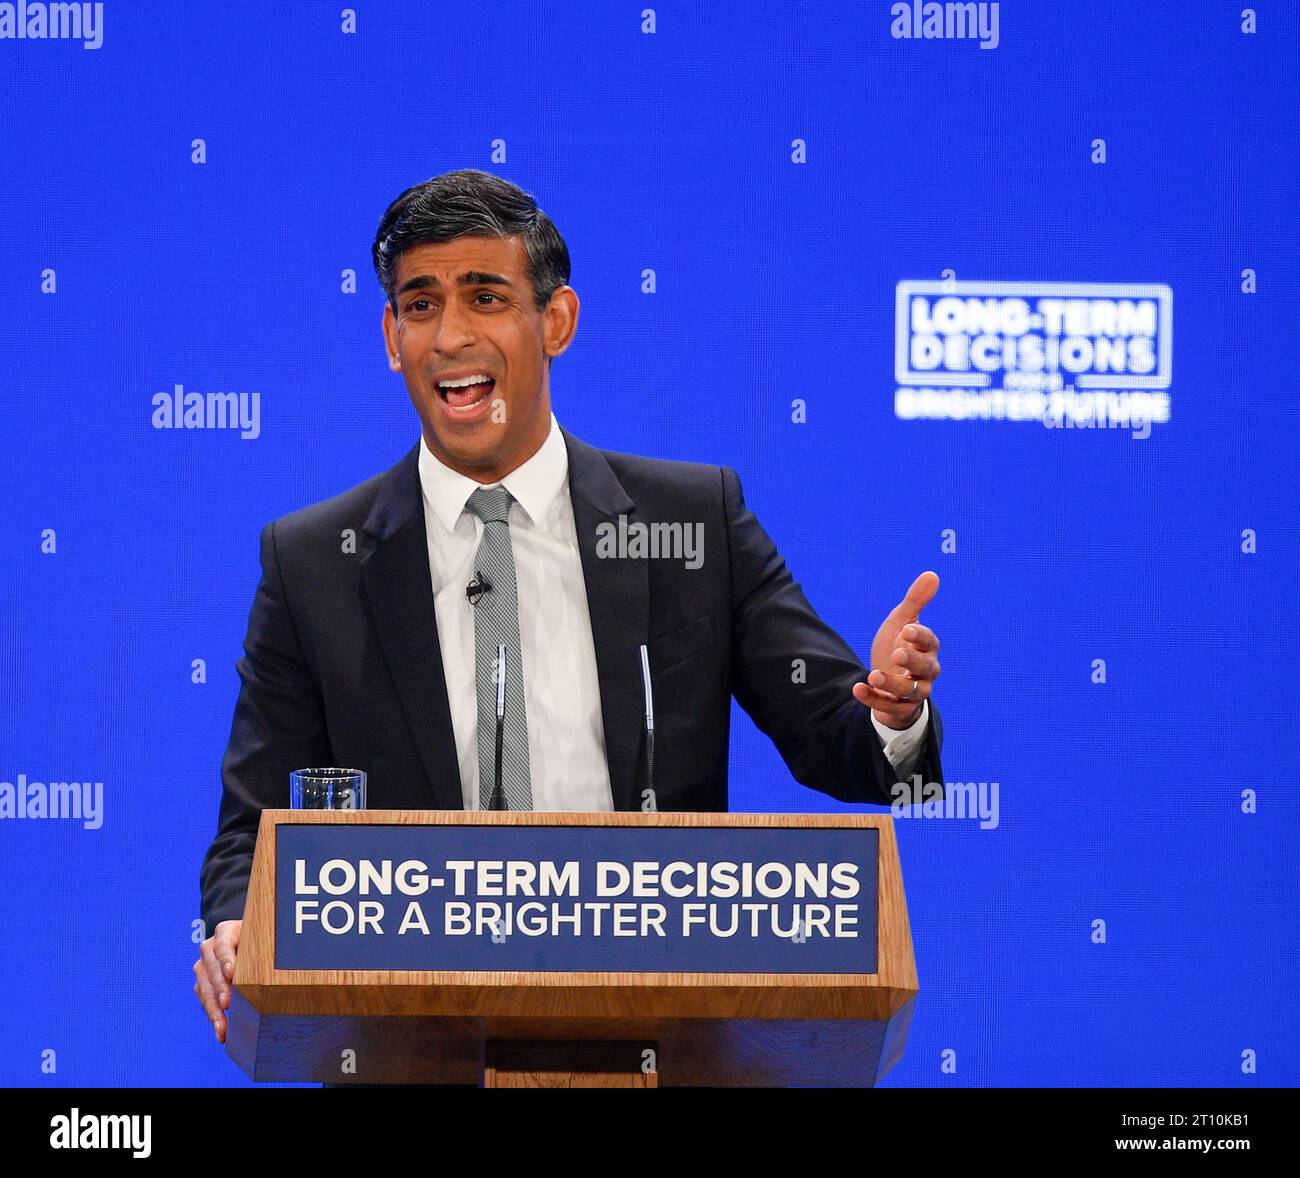 Prime Minister Rishi Sunak was introduced by his wife Akshata Murthy before he delivered the leaders speech at the Conservative Party Conference in Manchester on 4th October 2023. Stock Photo